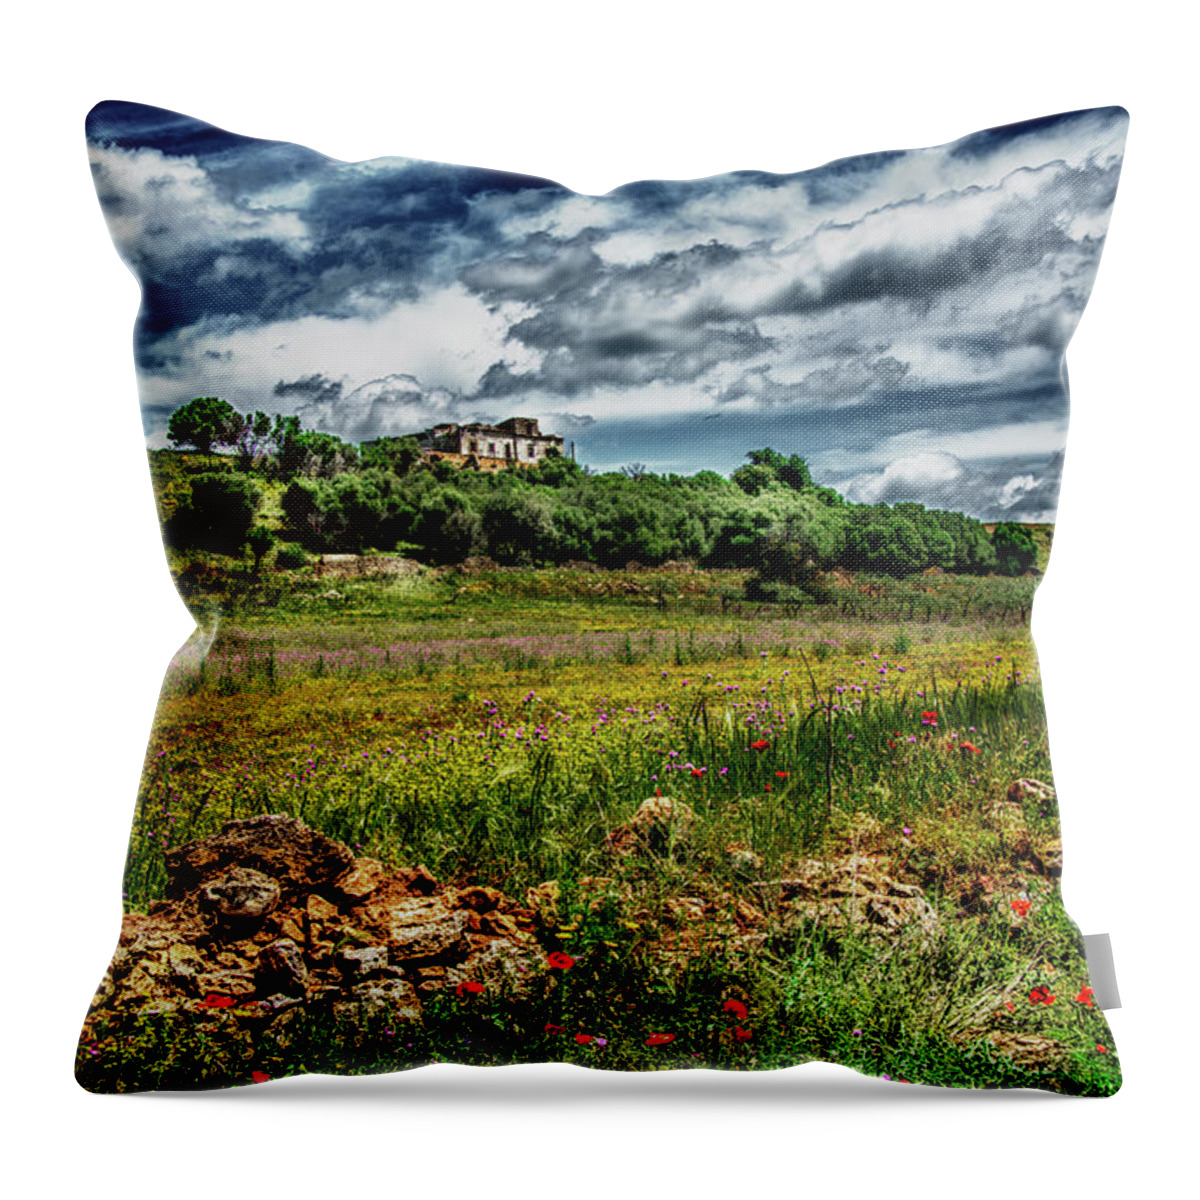  Throw Pillow featuring the photograph Country Side Sicily by Patrick Boening